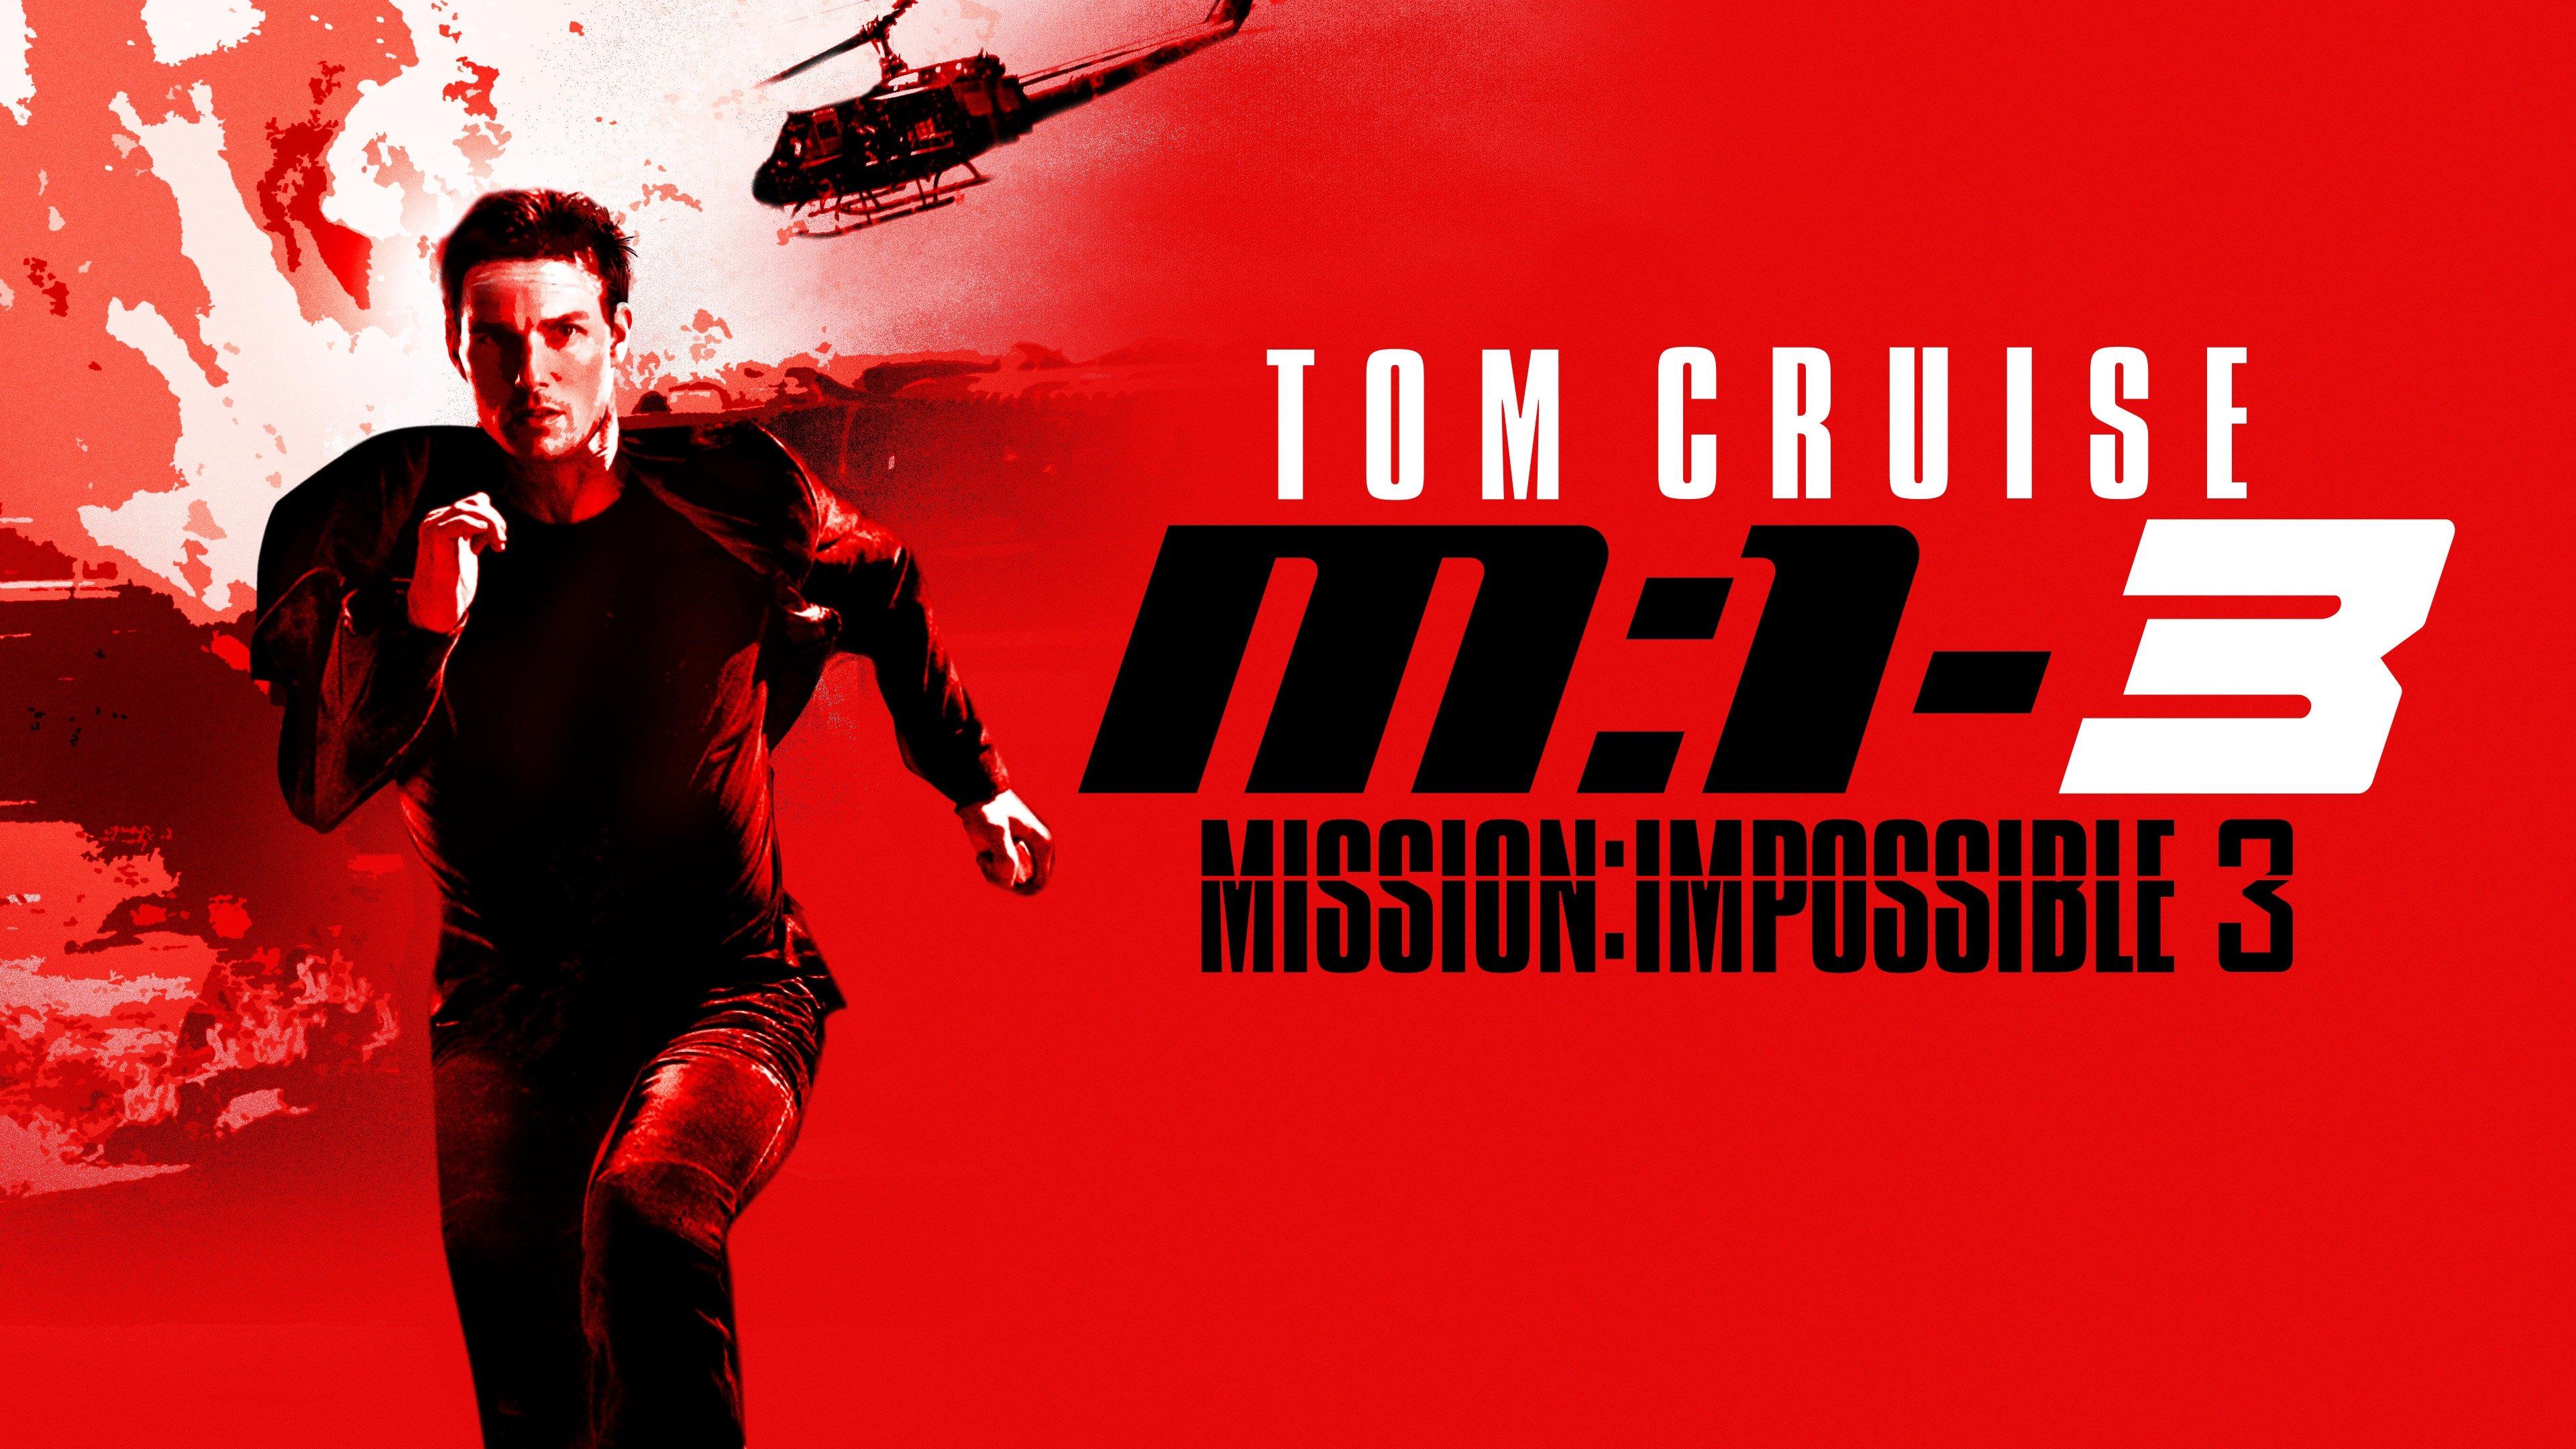 Watch Mission: Impossible III Streaming Online on Philo (Free Trial)